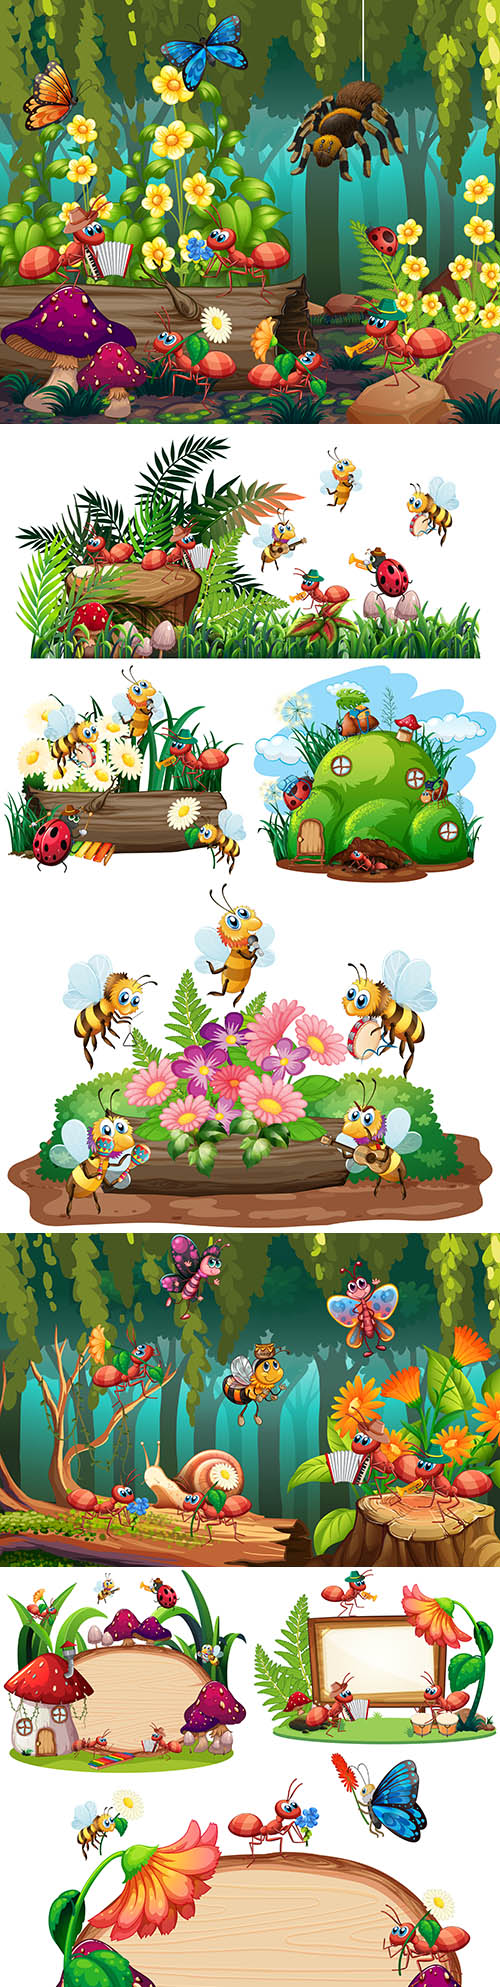 Fabulous forest landscape with cartoon insects and animals
